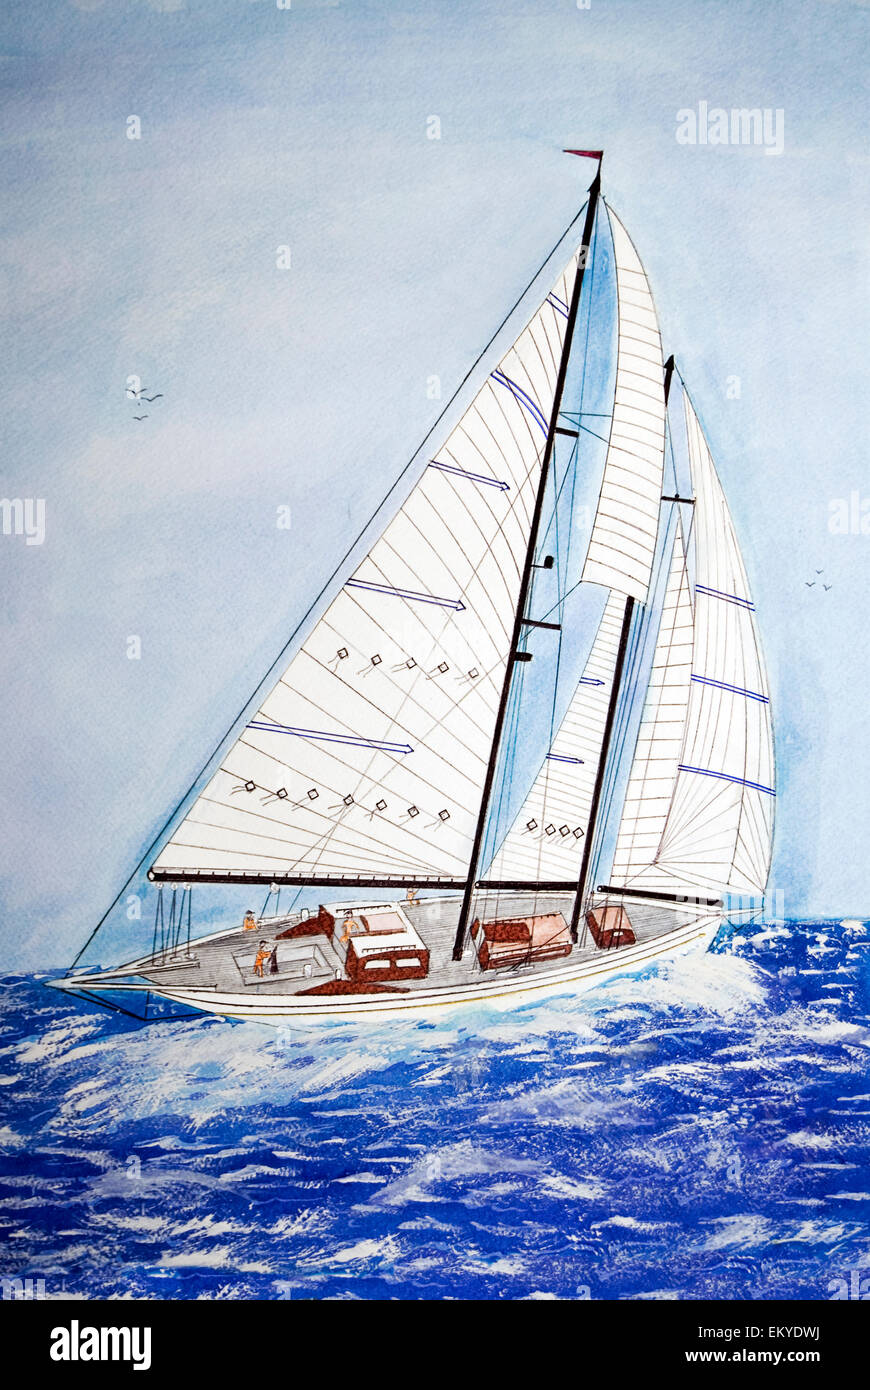 Watercolor painting of a sailboat on high seas. Stock Photo